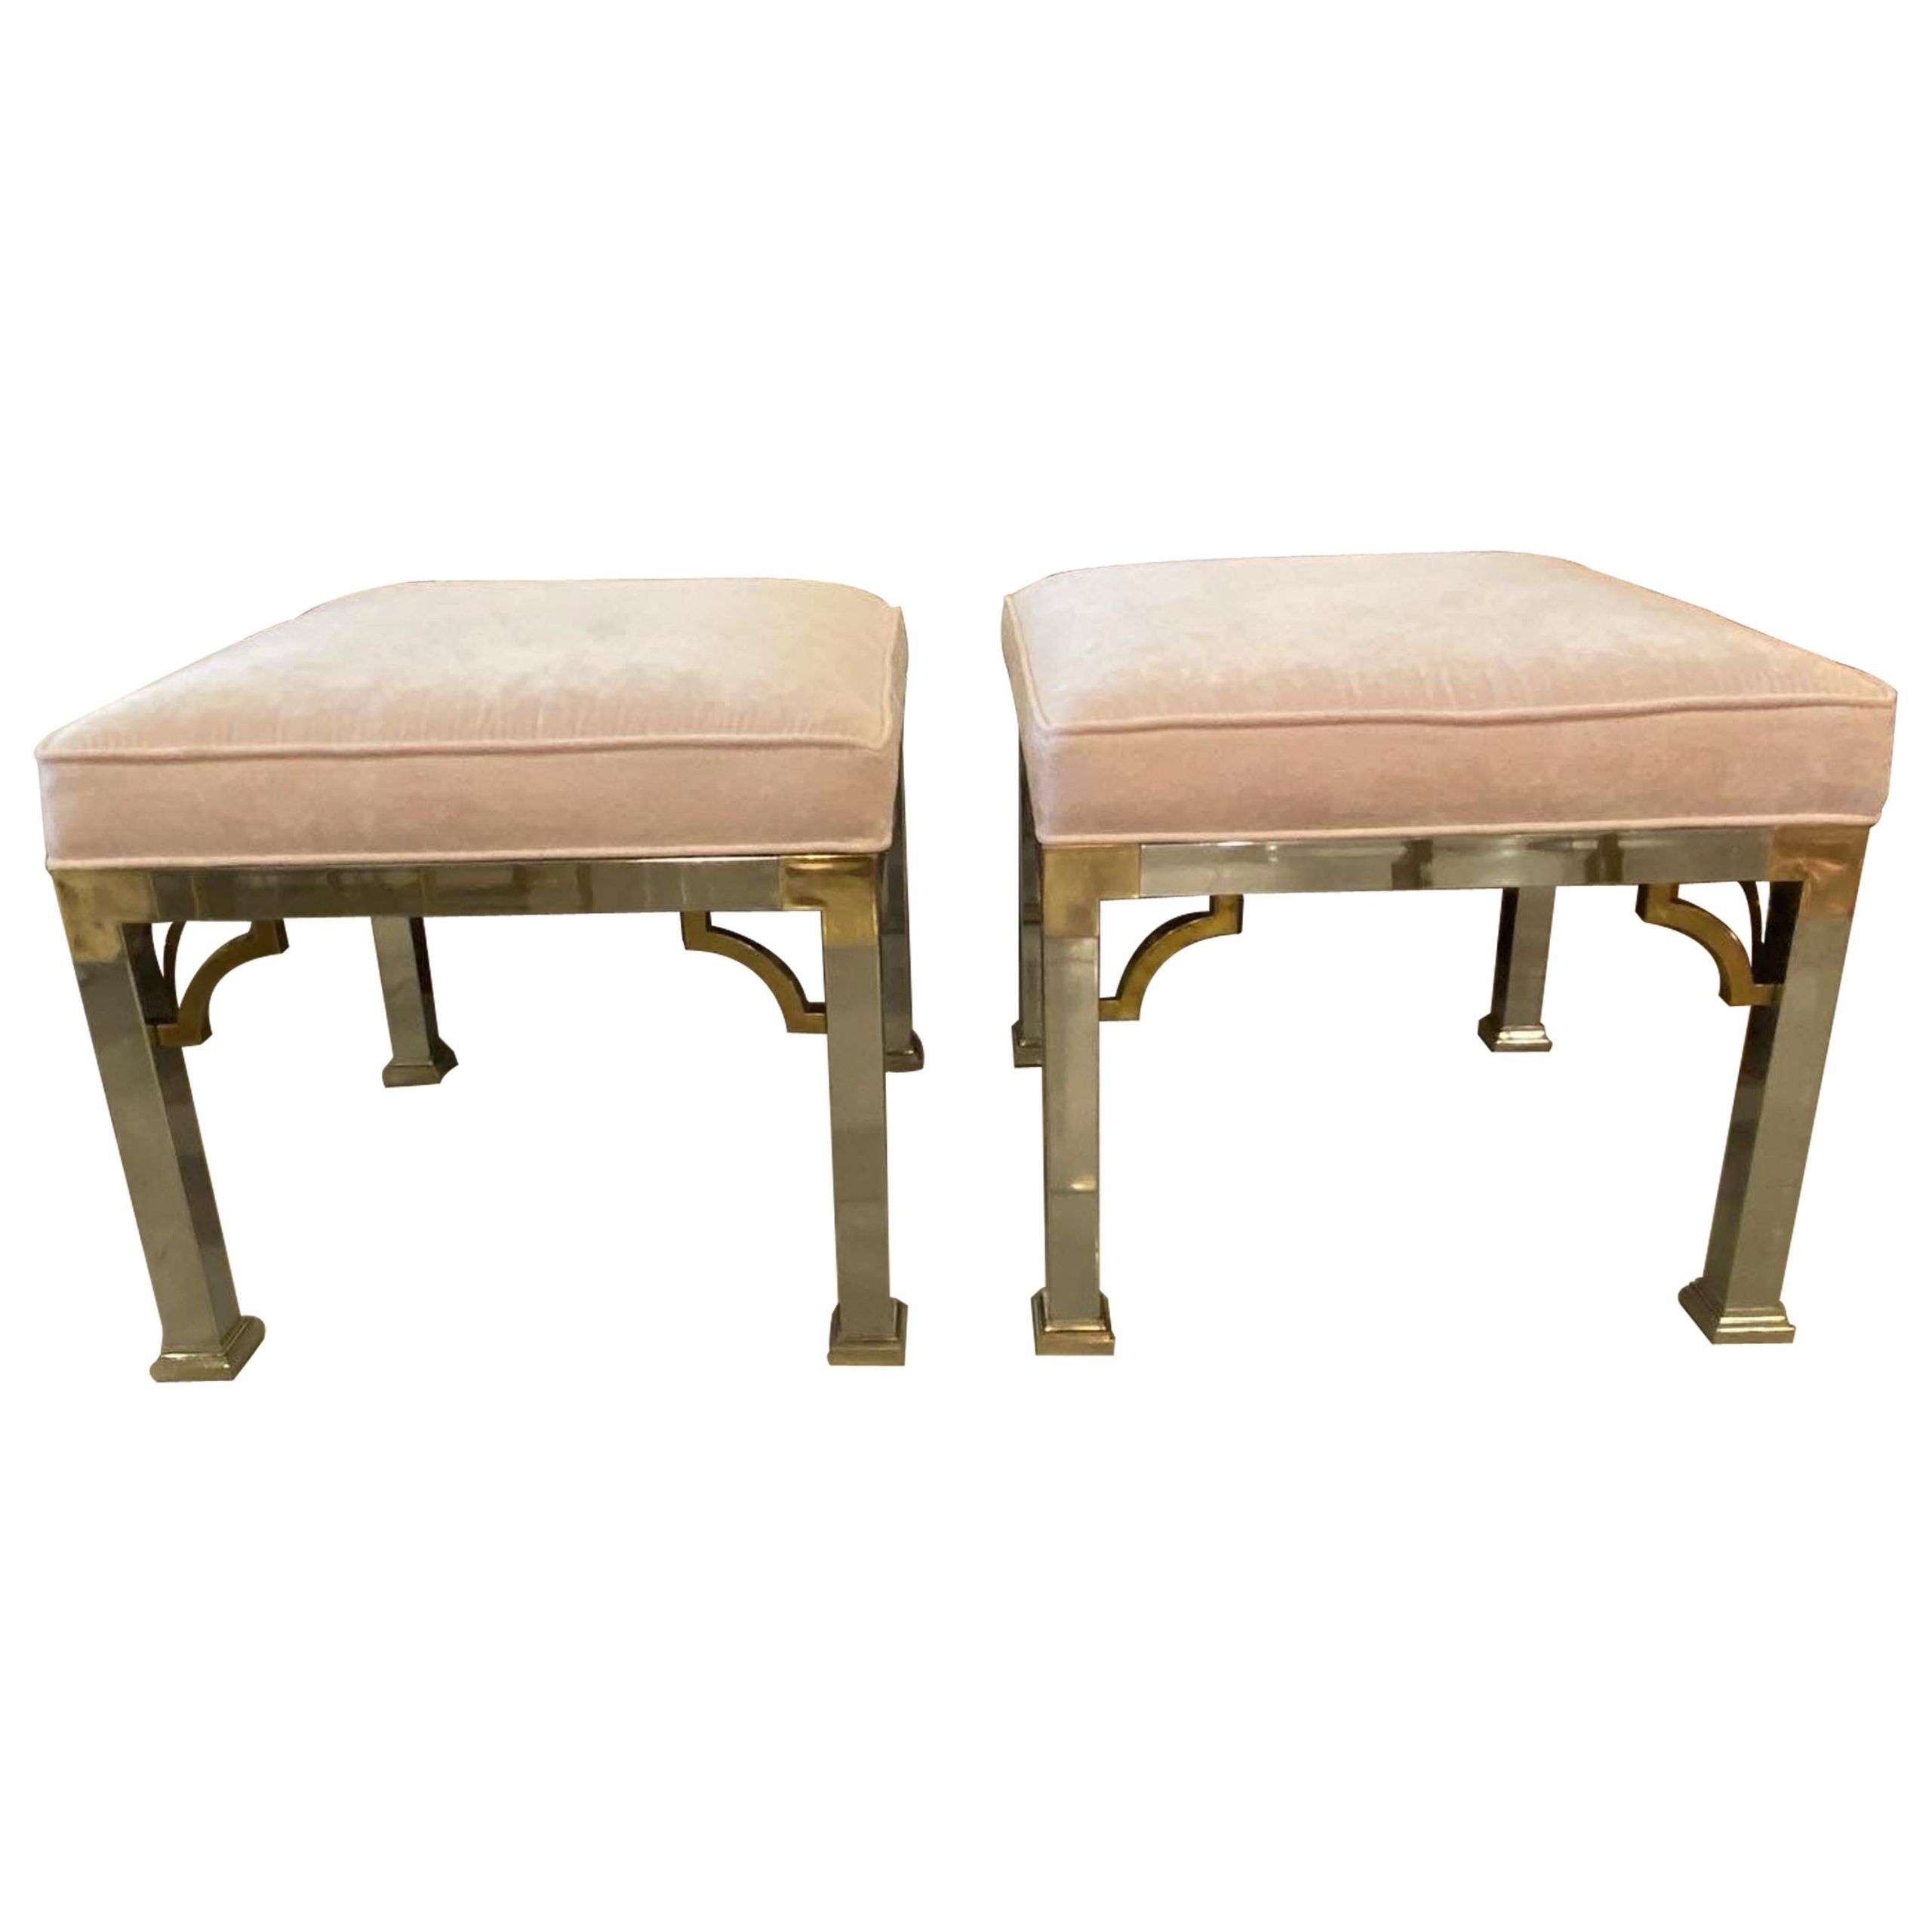 Vintage Pair Of Chrome And Brass Upholstered Pink Velvet Benches Stools  Ottomans For Sale At 1stdibs Regarding Antique Brass Ottomans (View 14 of 15)